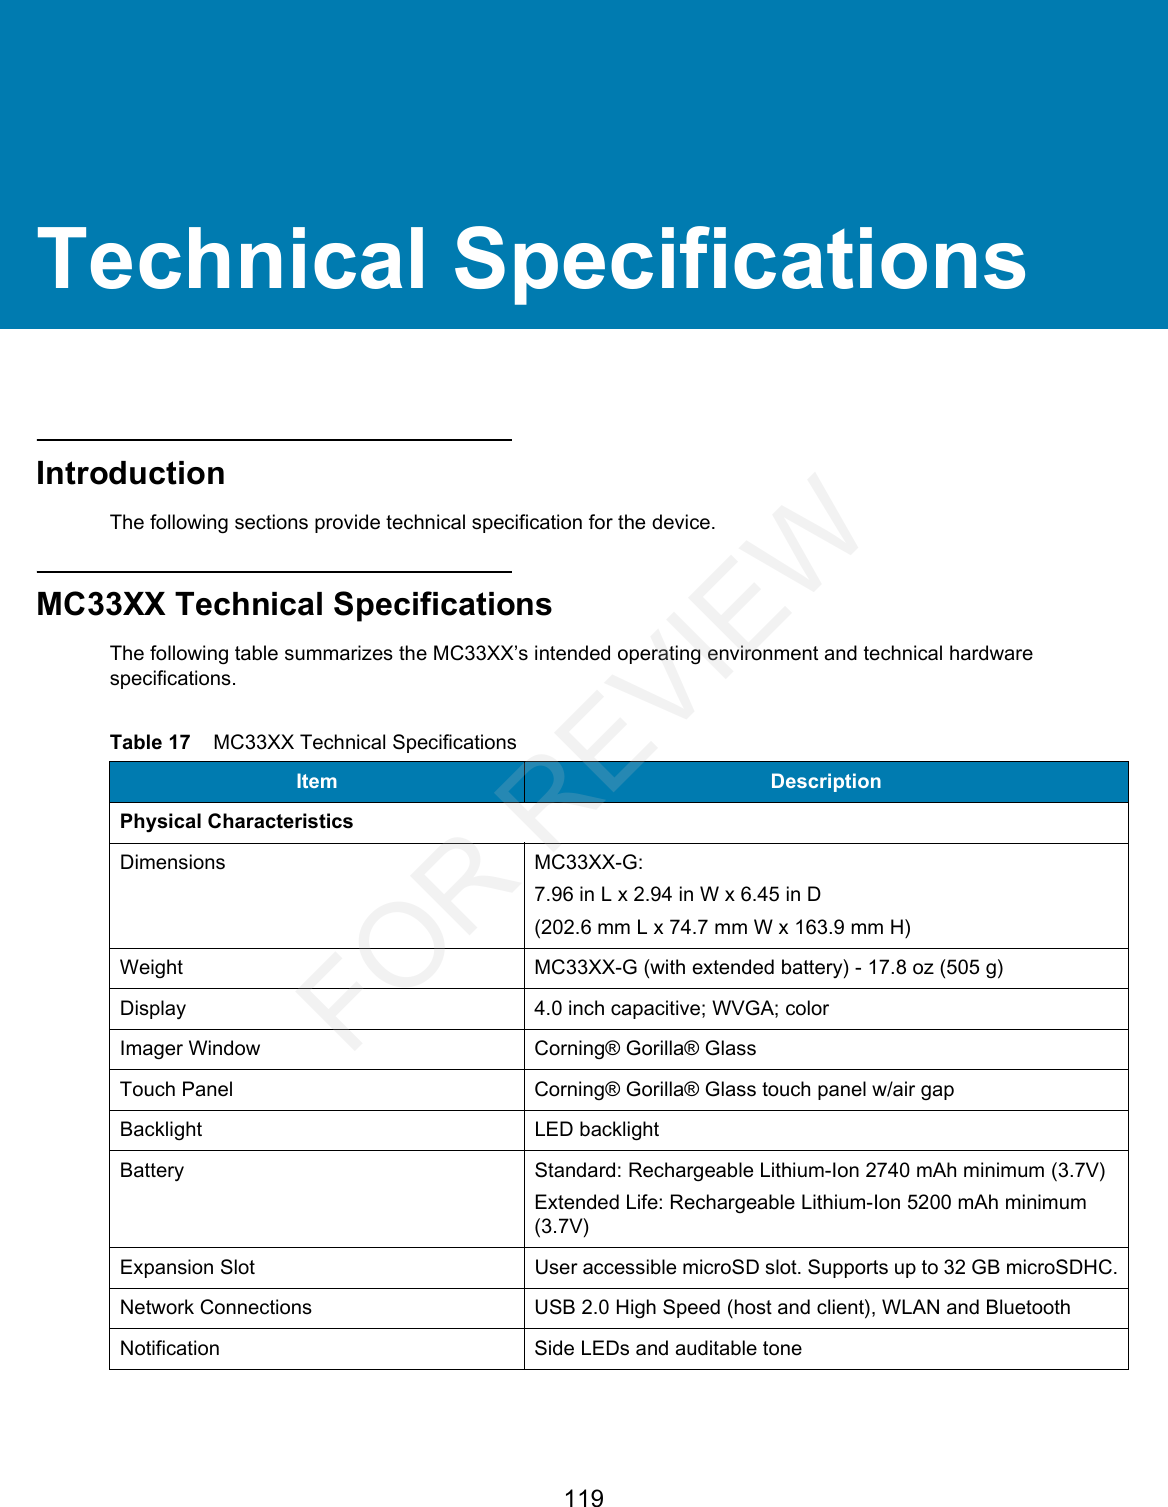 119Technical SpecificationsIntroductionThe following sections provide technical specification for the device.MC33XX Technical SpecificationsThe following table summarizes the MC33XX’s intended operating environment and technical hardware specifications.Table 17    MC33XX Technical Specifications Item DescriptionPhysical CharacteristicsDimensions MC33XX-G:7.96 in L x 2.94 in W x 6.45 in D(202.6 mm L x 74.7 mm W x 163.9 mm H)Weight MC33XX-G (with extended battery) - 17.8 oz (505 g)Display 4.0 inch capacitive; WVGA; colorImager Window Corning® Gorilla® GlassTouch Panel Corning® Gorilla® Glass touch panel w/air gapBacklight LED backlightBattery Standard: Rechargeable Lithium-Ion 2740 mAh minimum (3.7V)Extended Life: Rechargeable Lithium-Ion 5200 mAh minimum (3.7V)Expansion Slot User accessible microSD slot. Supports up to 32 GB microSDHC.Network Connections USB 2.0 High Speed (host and client), WLAN and BluetoothNotification Side LEDs and auditable toneFOR REVIEW